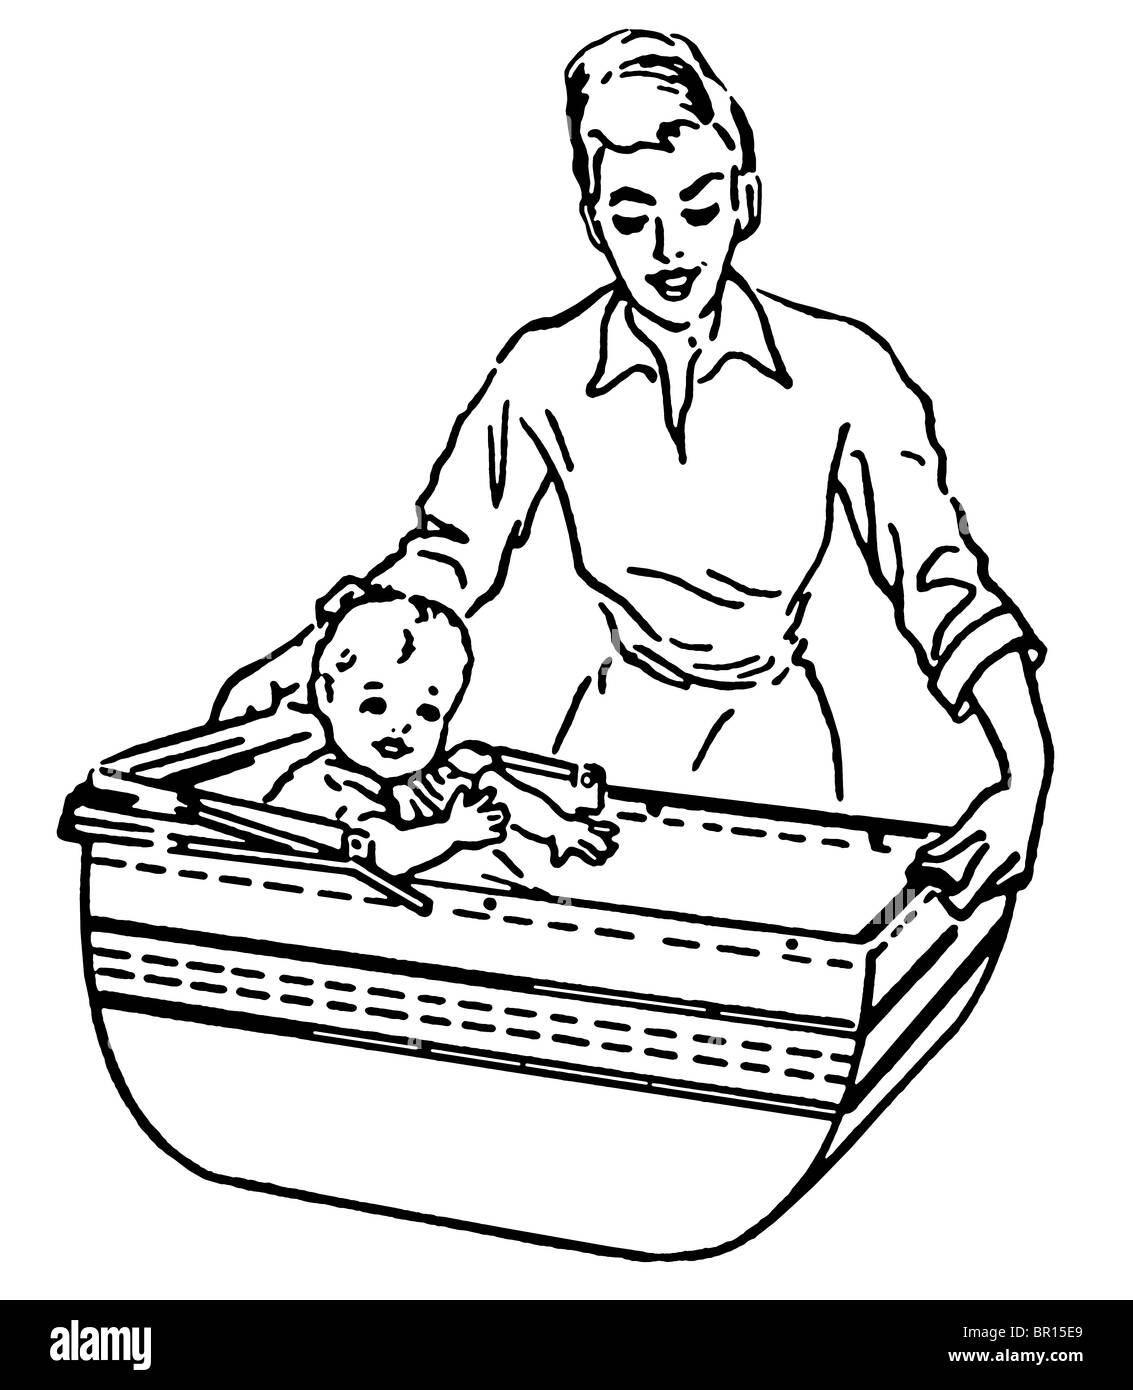 A black and white version of a vintage style illustration of a woman and baby Stock Photo